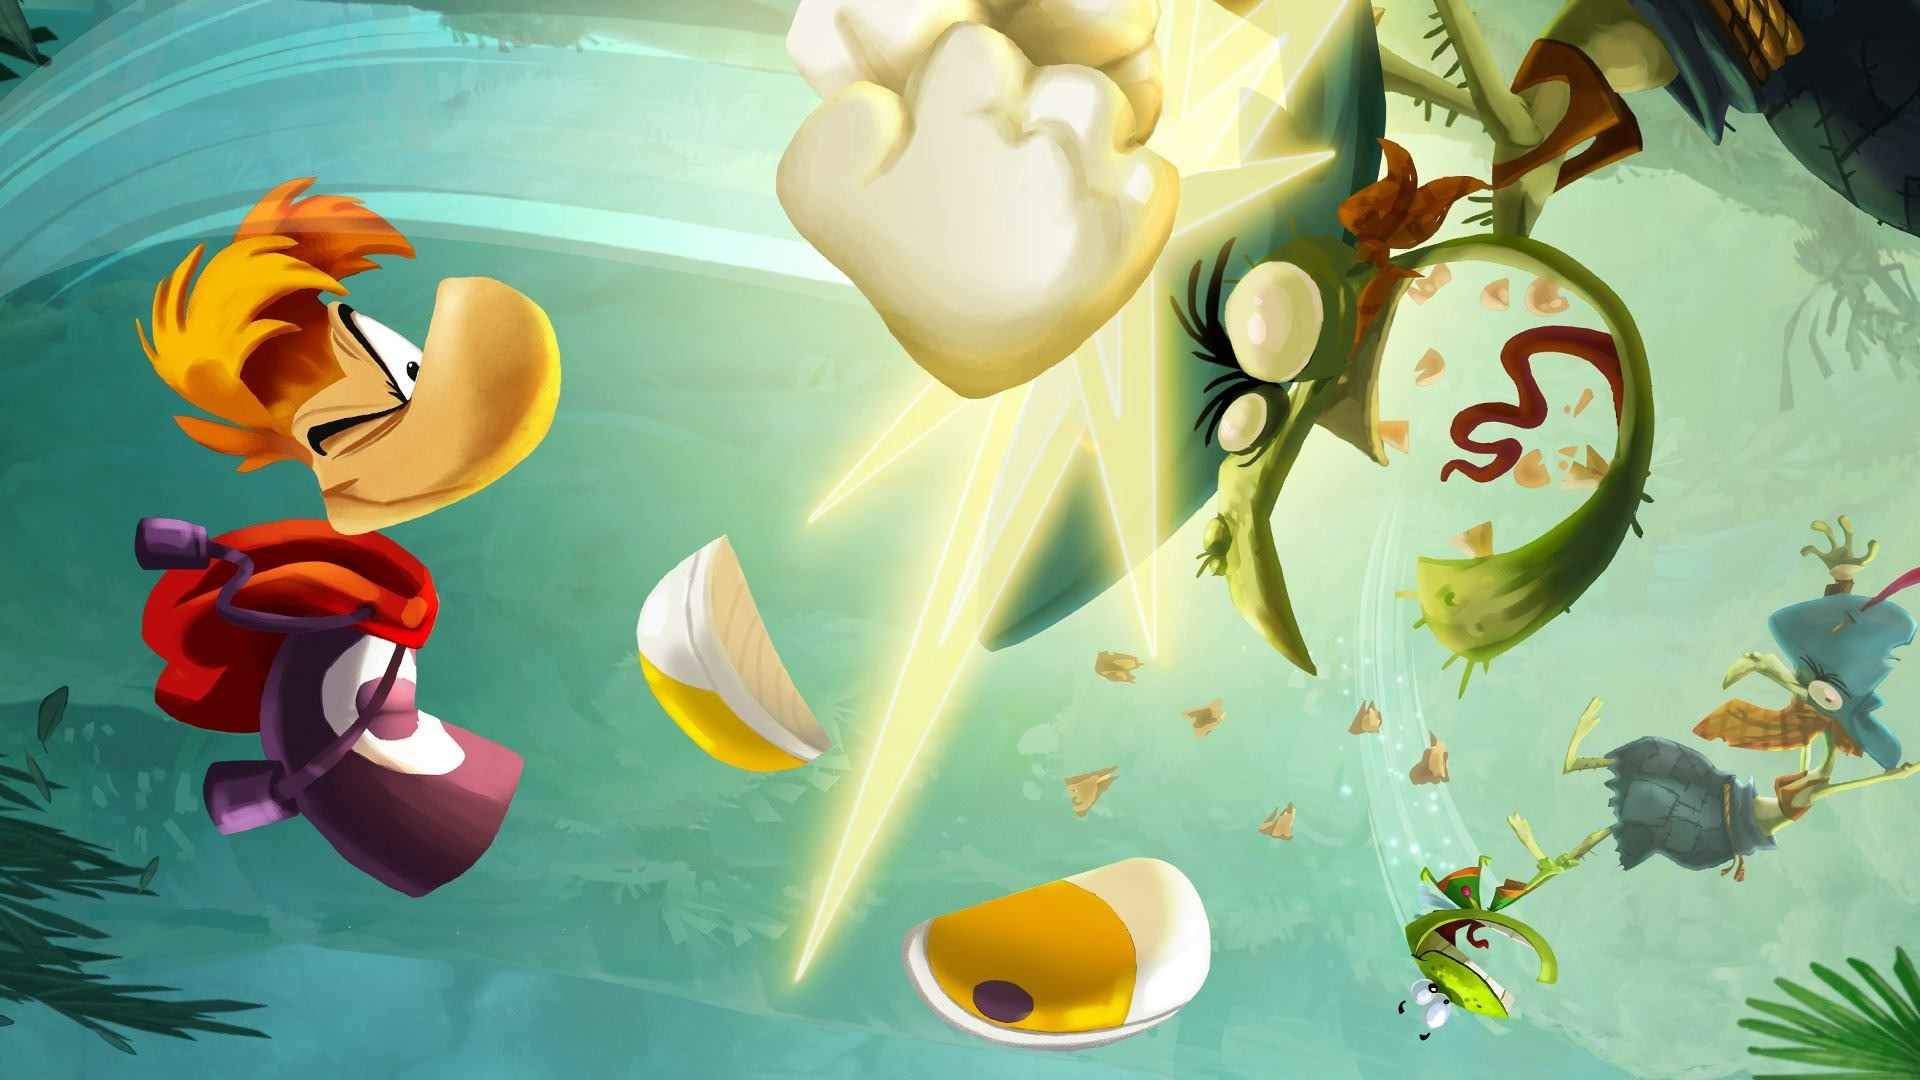 Image] I hope we get the fourth part of Rayman on PS5. I loved Rayman 3   : r/PS5